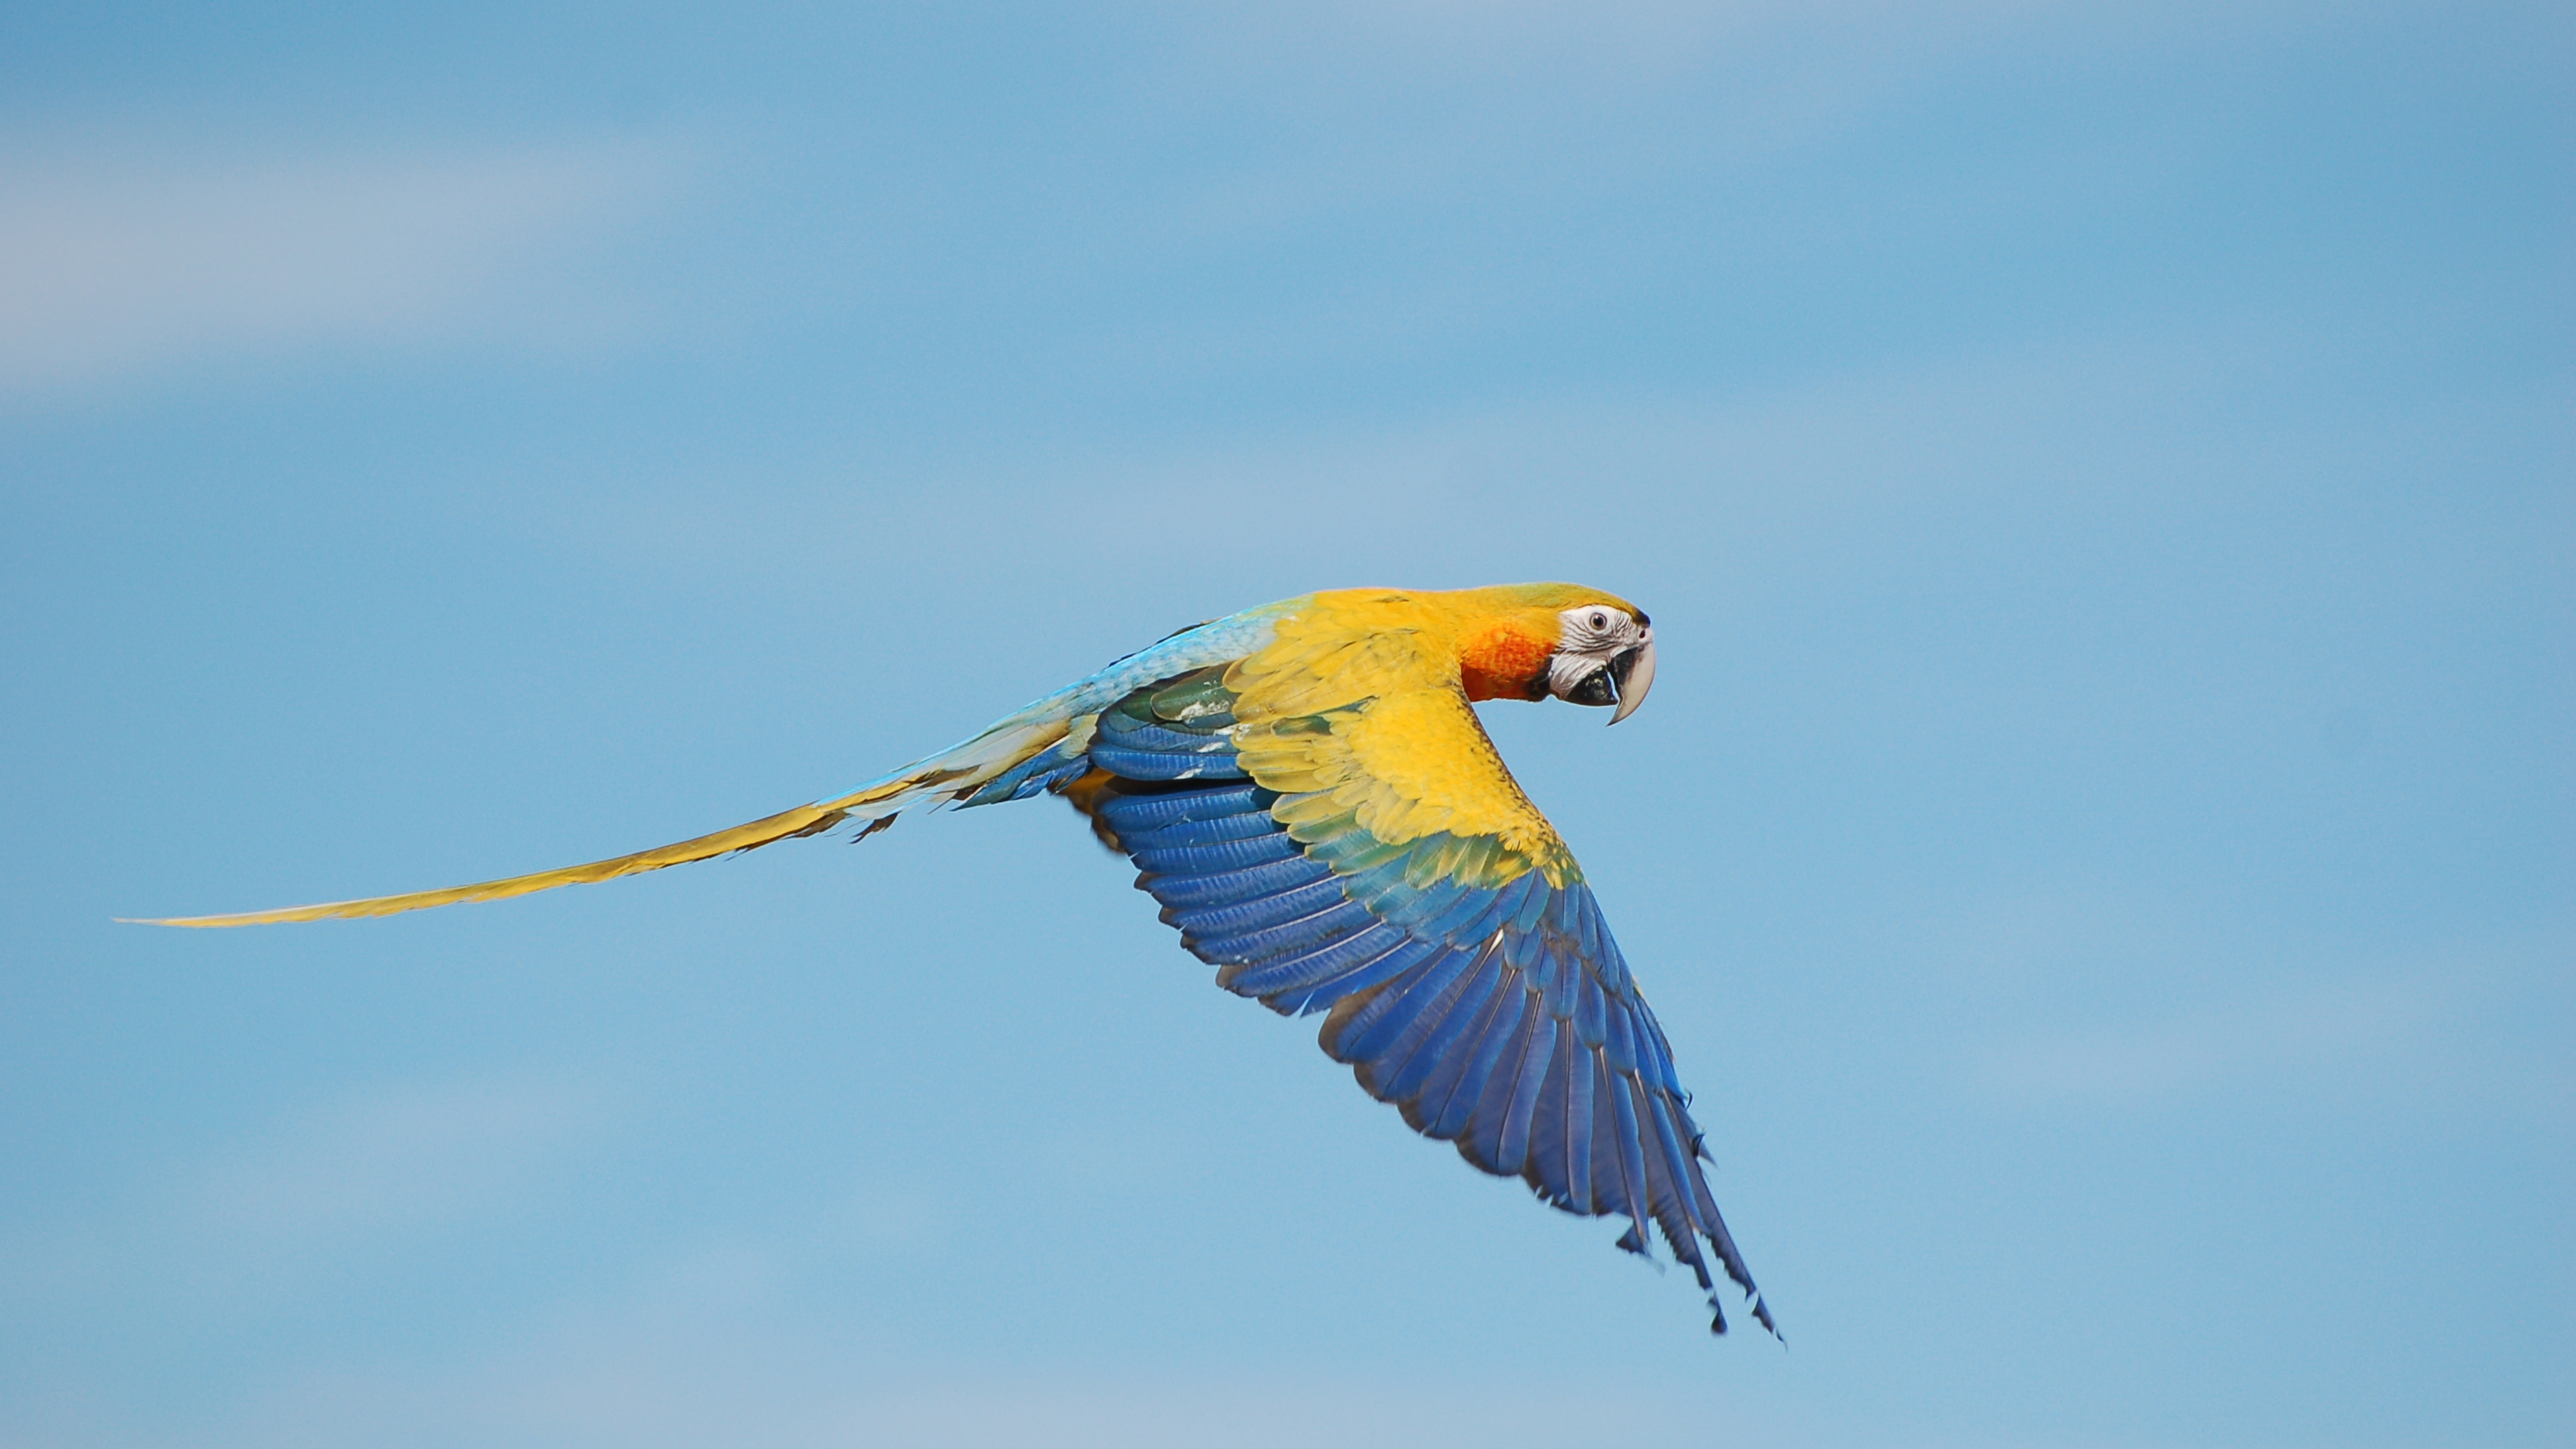 General 3840x2160 birds parrot animals closeup simple background flying wings sky colorful beak side view